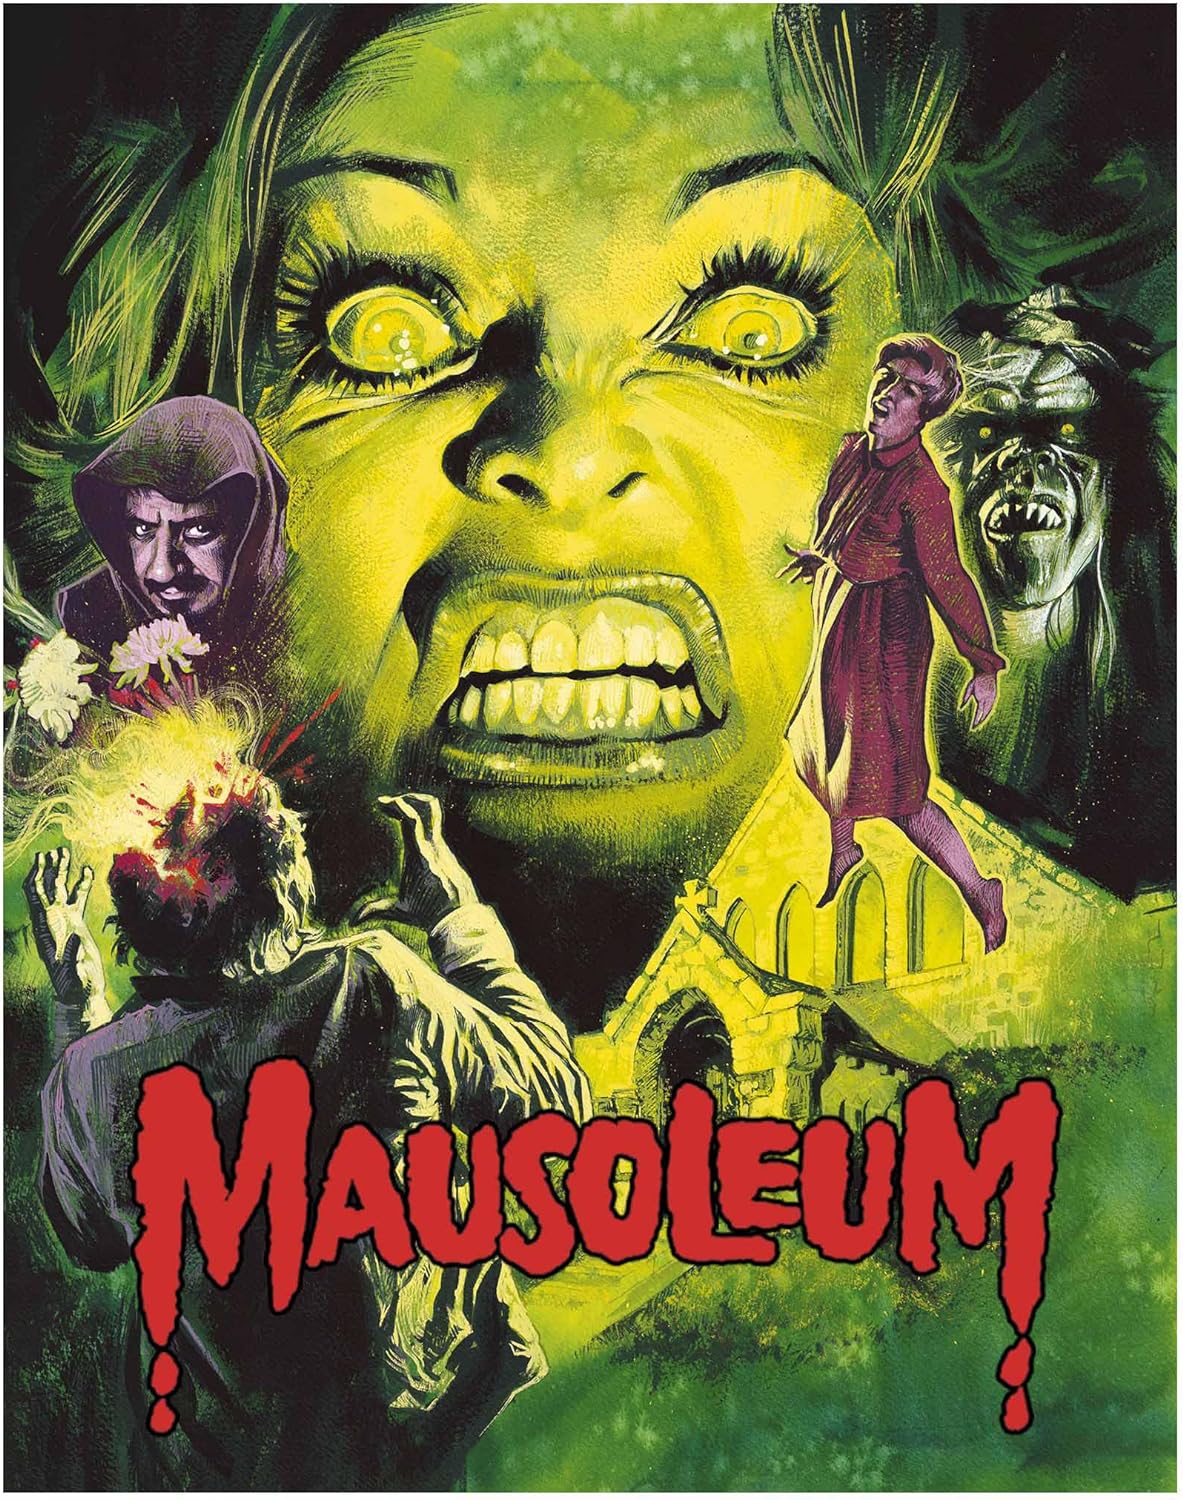 Mausoleum Limited Edition Blu-ray (Treasured Films/Region free) [Preorder] (Title further delayed till December 18, 2023)